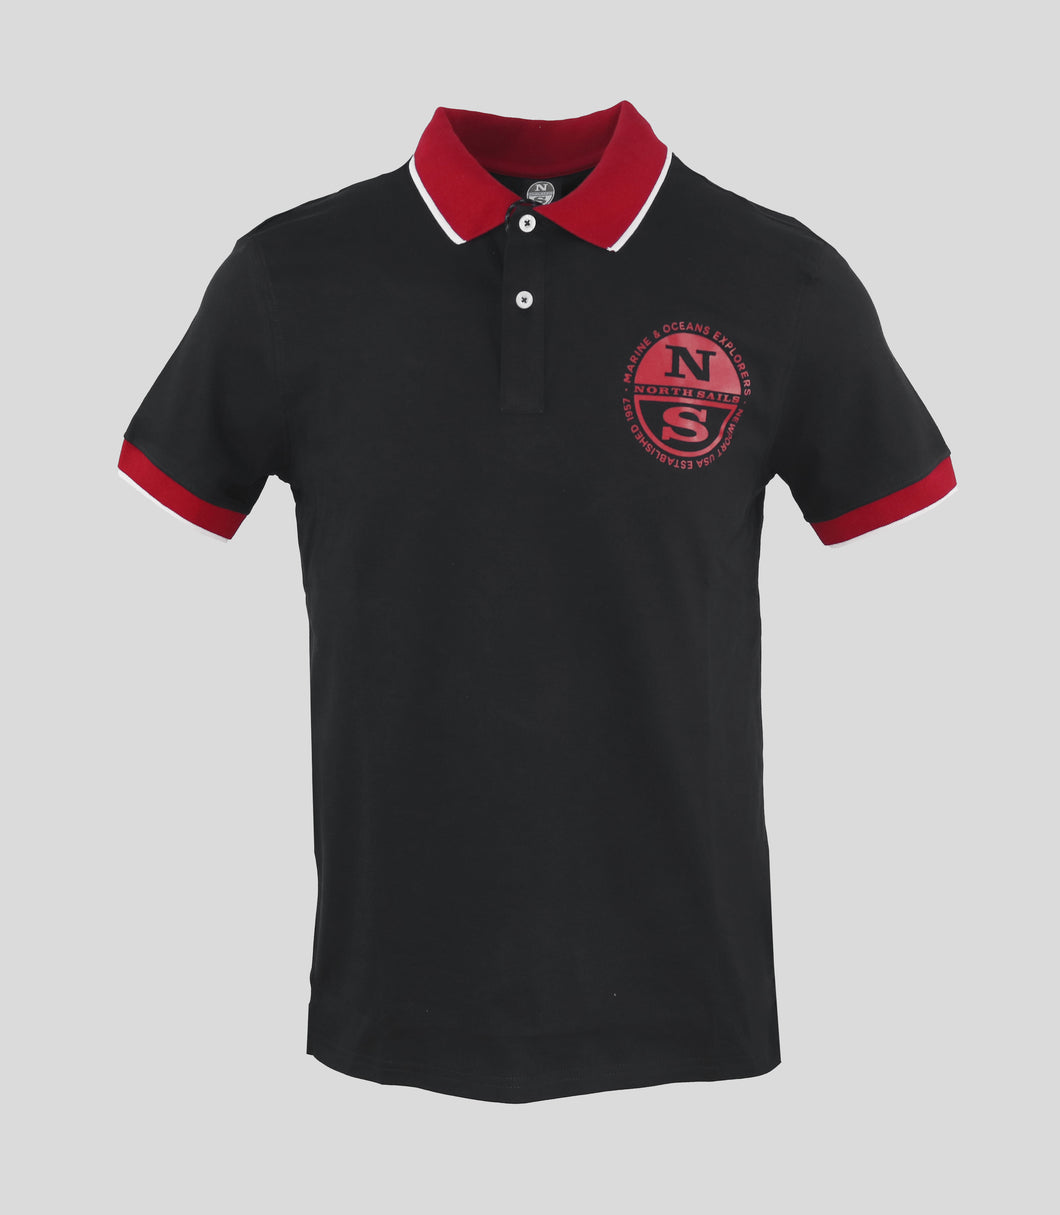 North Sails, Classic Black Polo Shirt With Emblem On The Chest